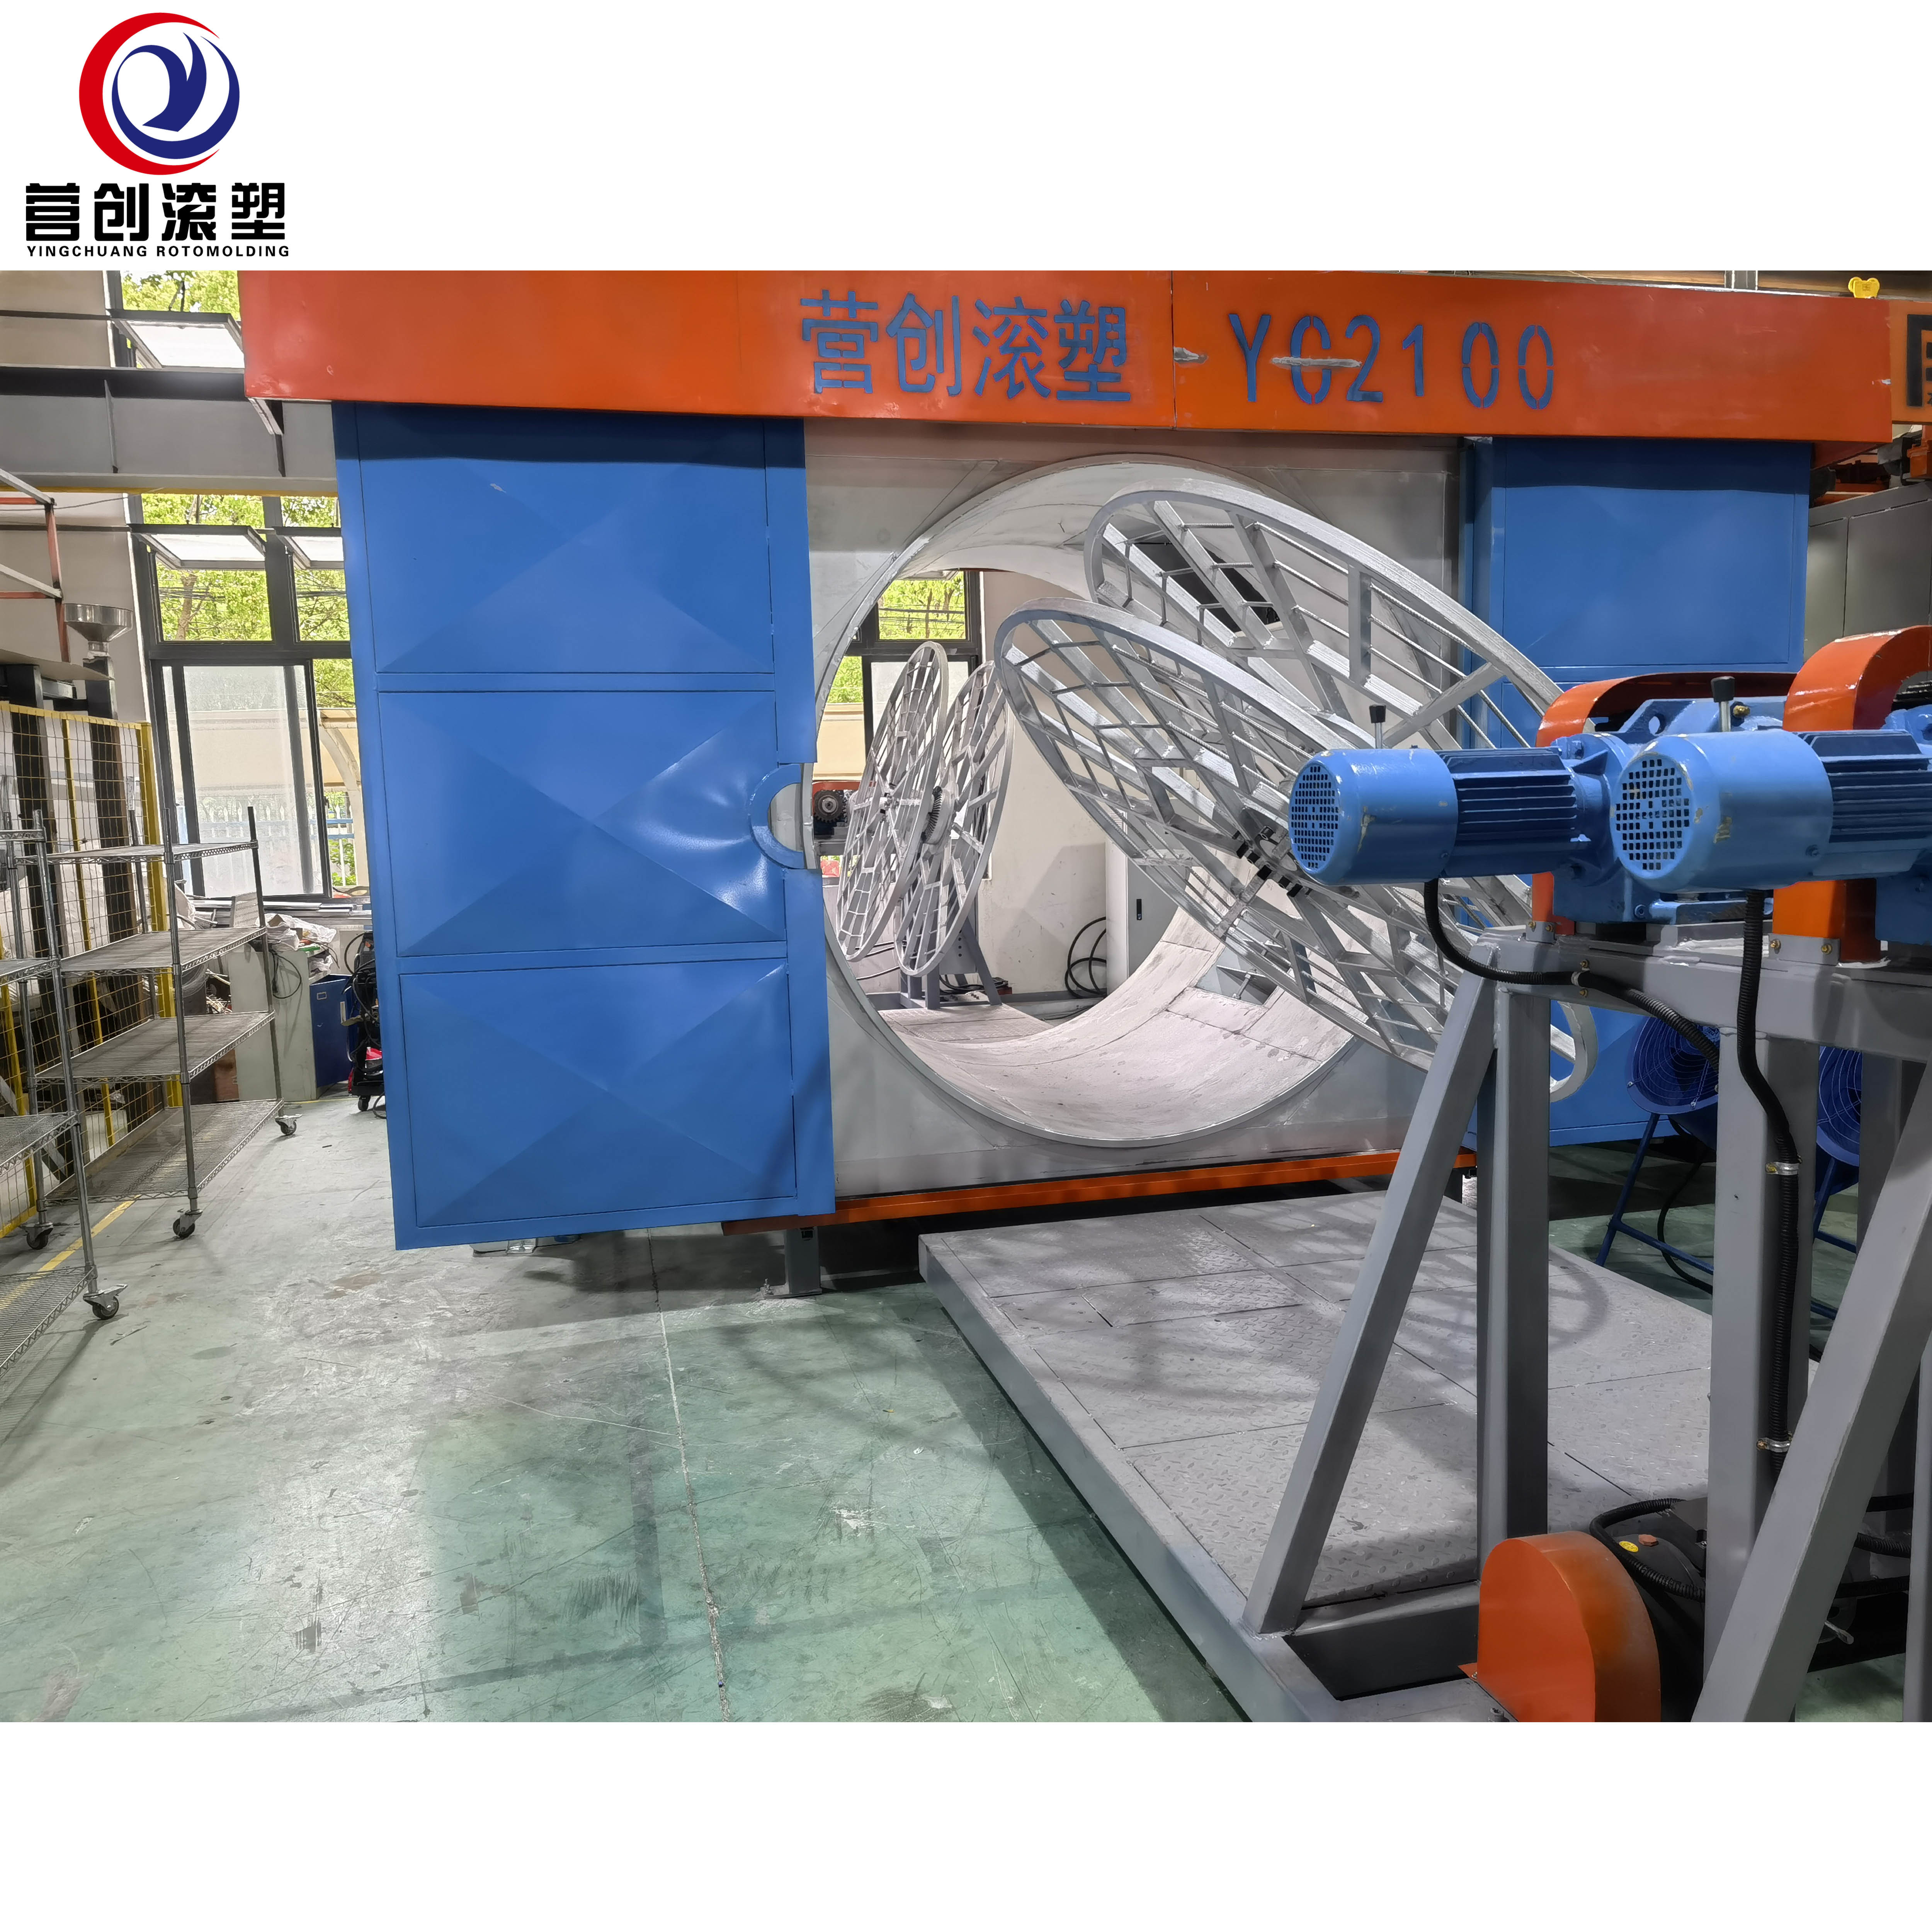 Quality Rotomolding Machine For Manufacturing Large Hollow Plastics Rotational Molding for sale